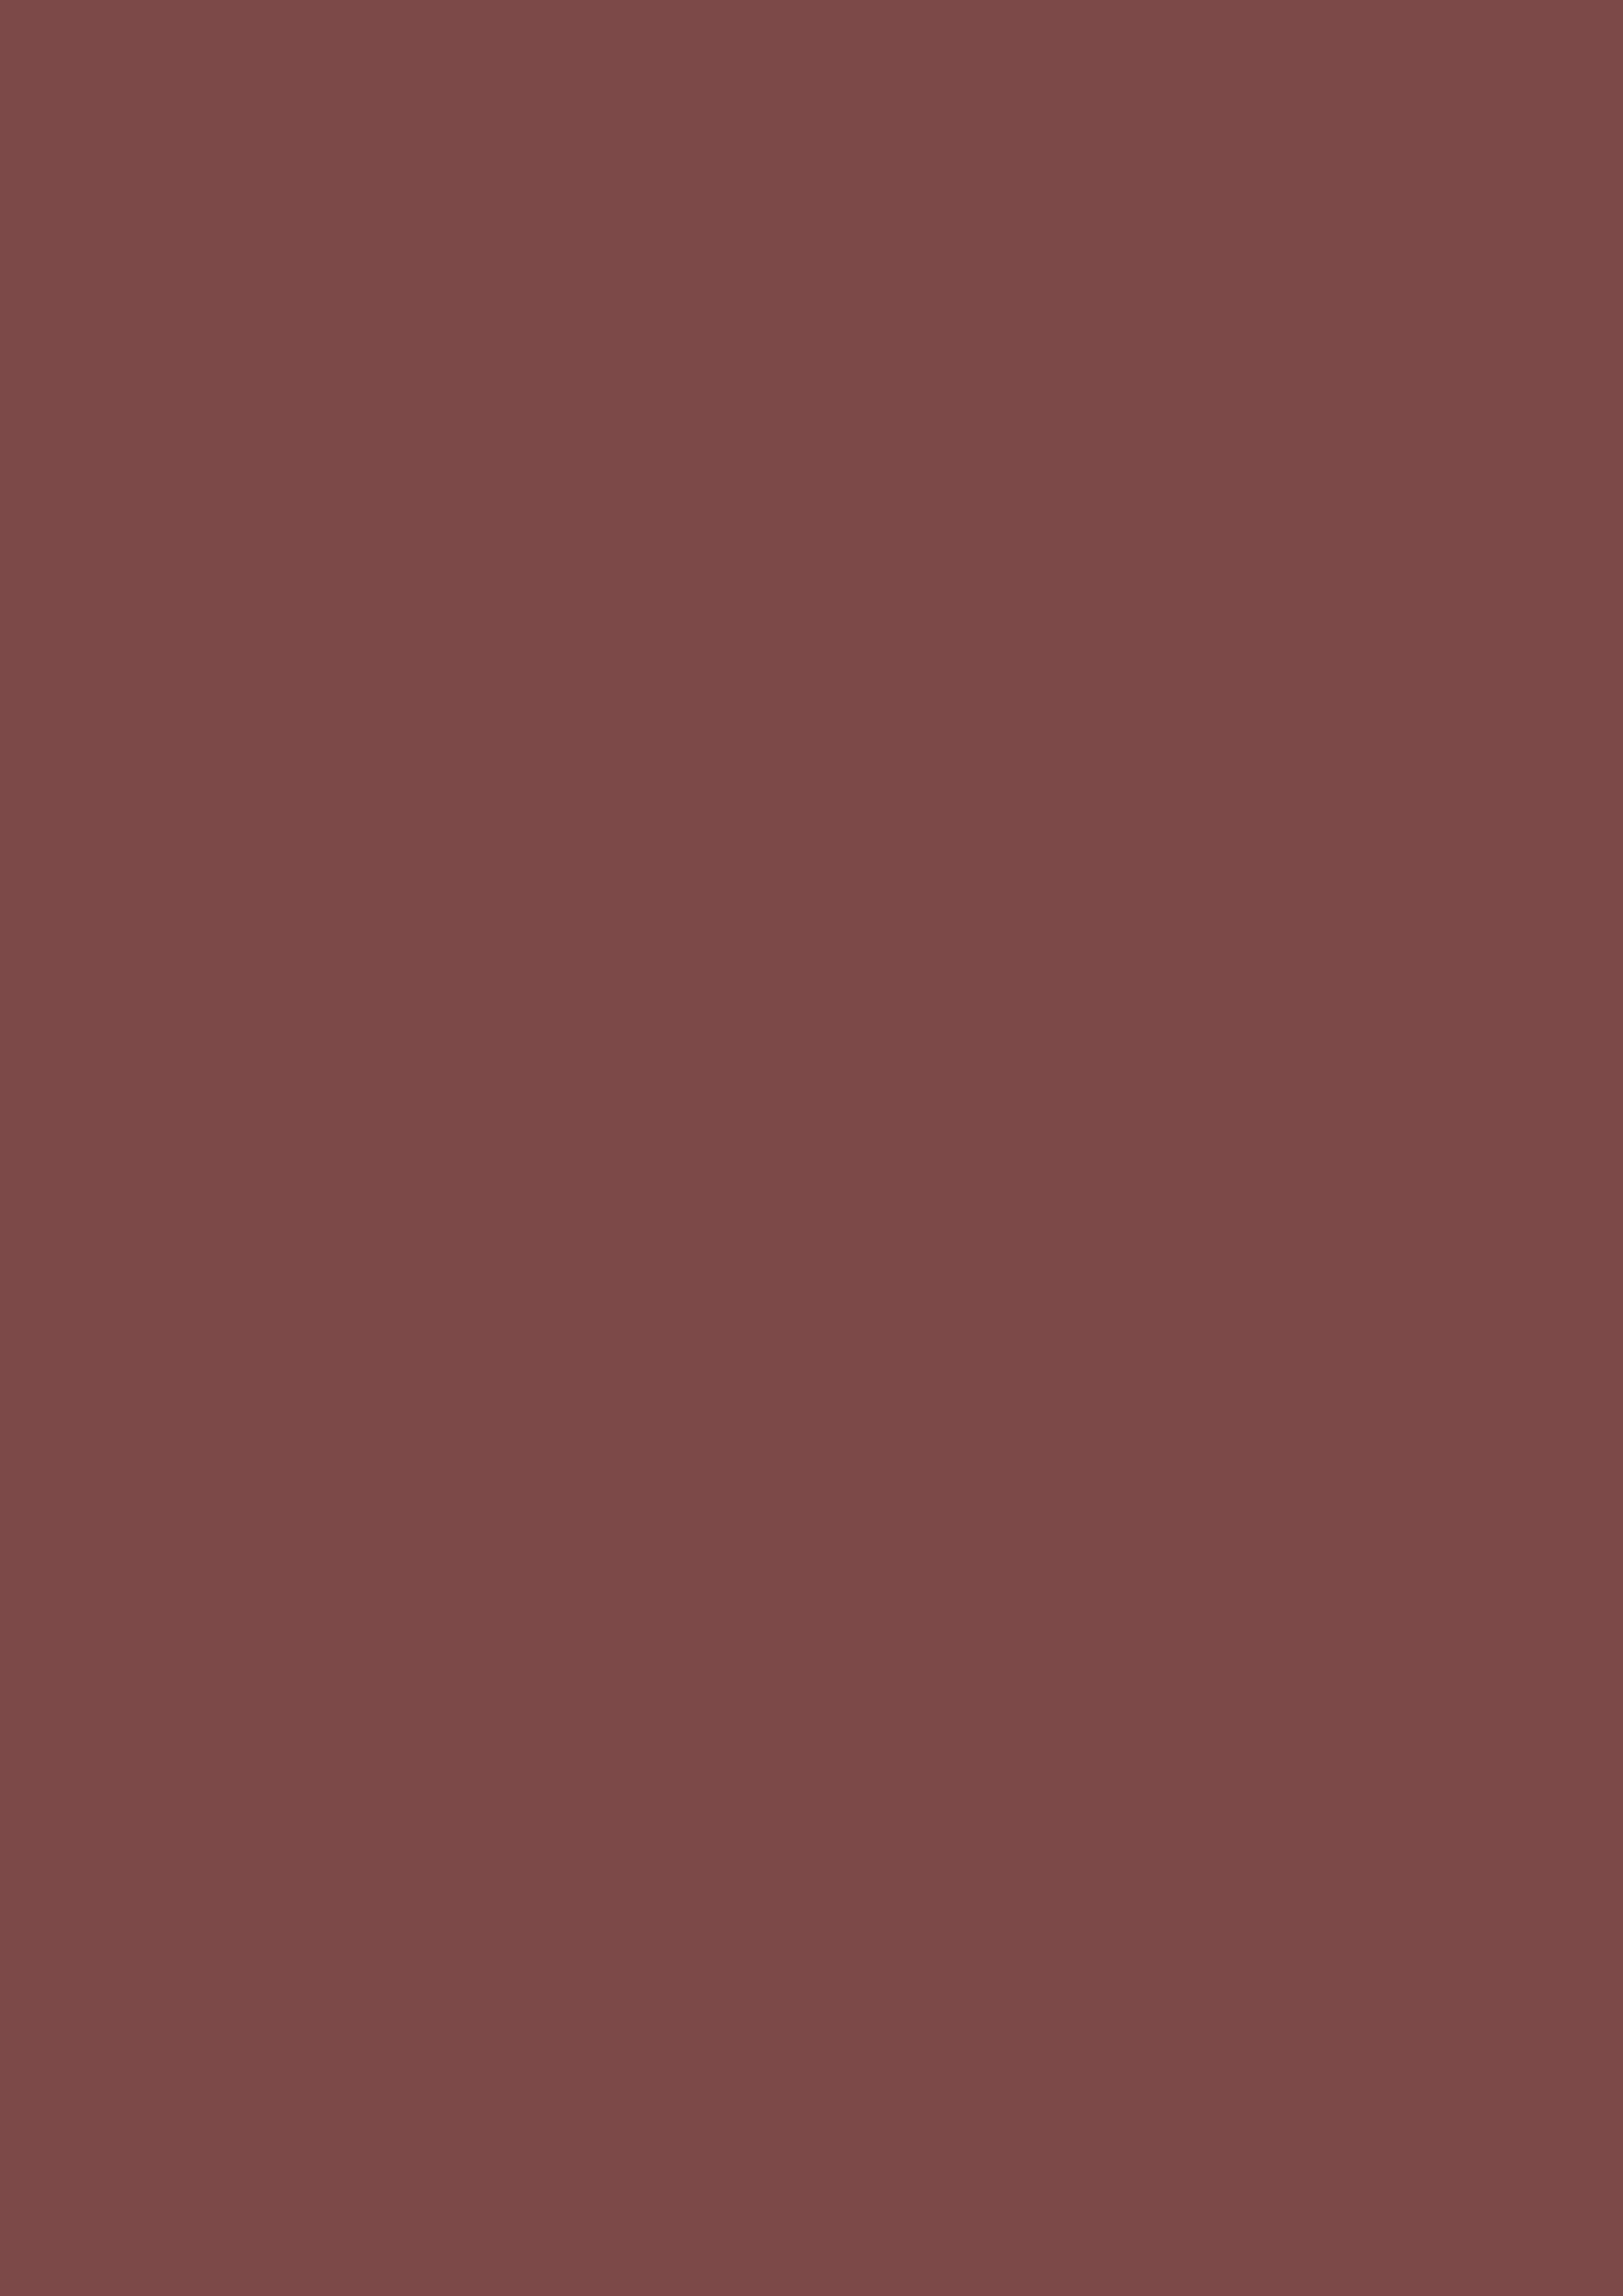 2480x3508 Tuscan Red Solid Color Background